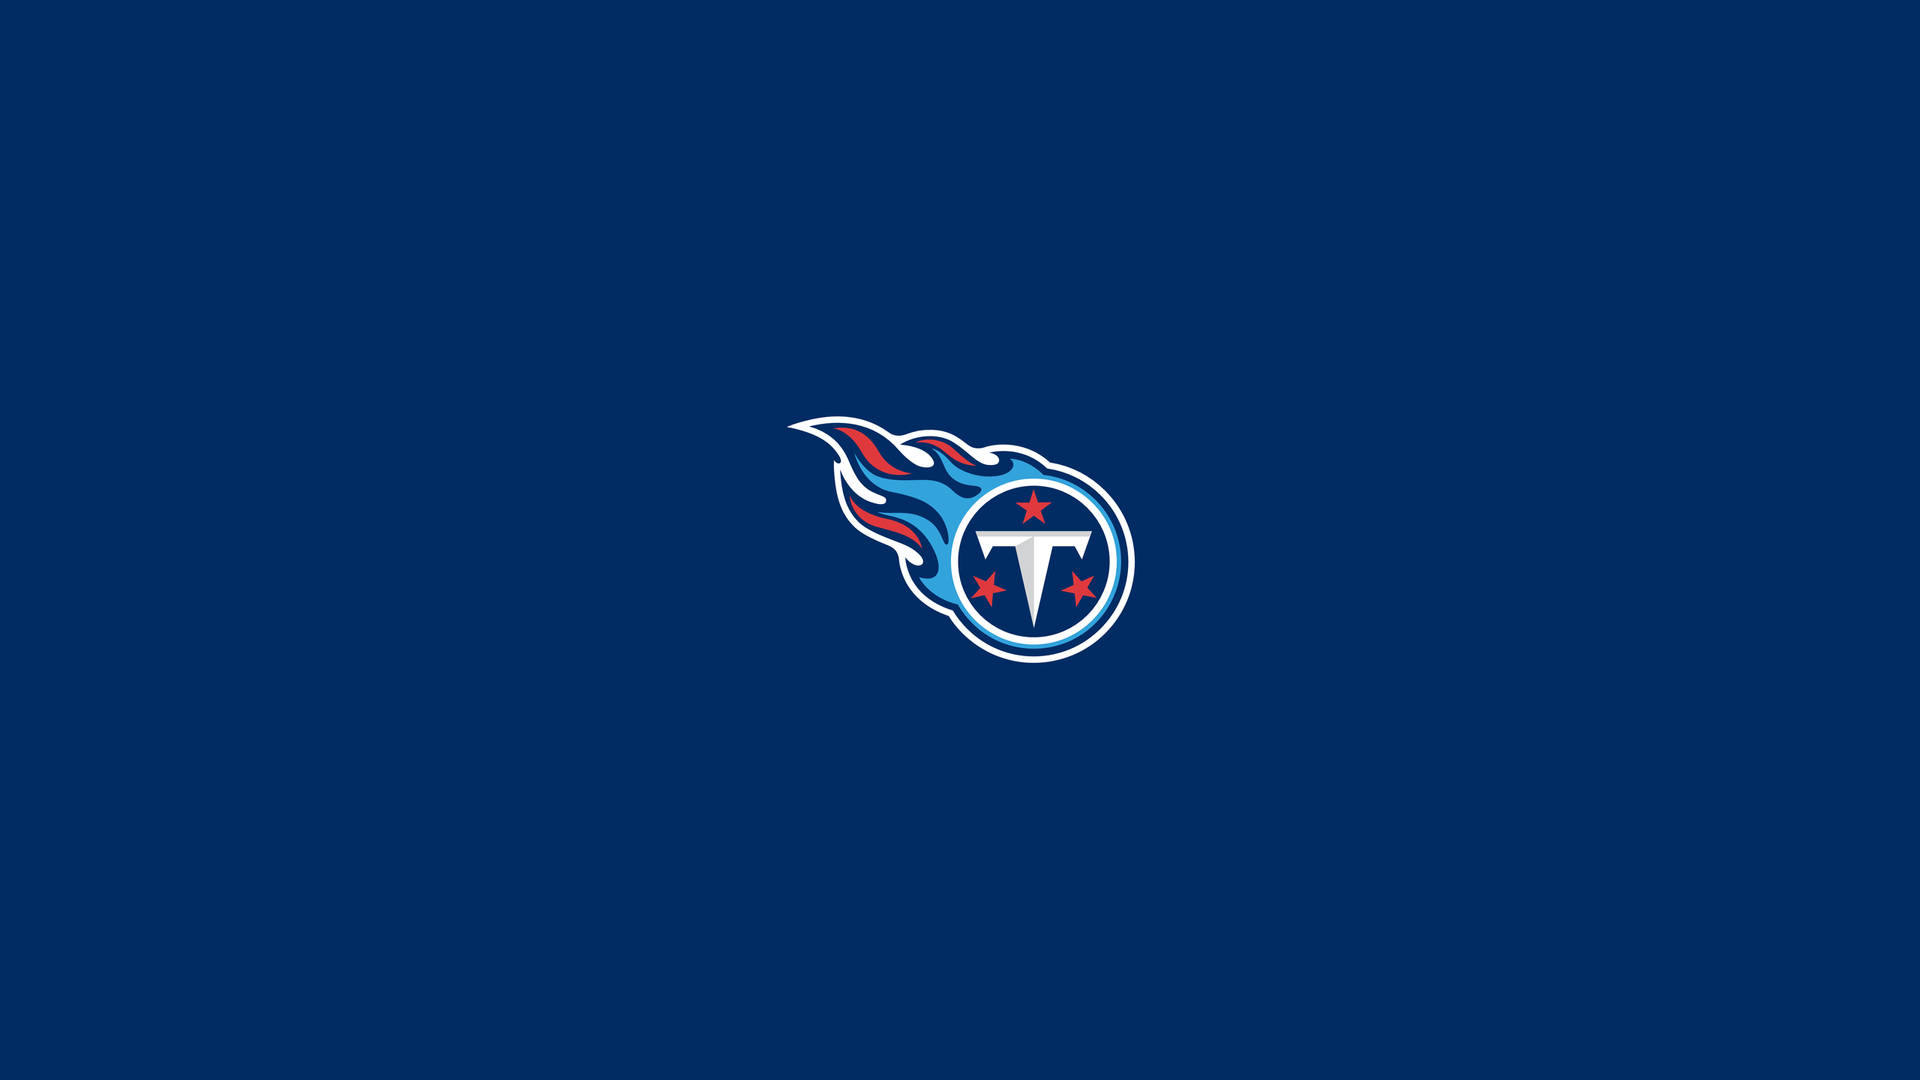 Tennessee Titans Logo Blue Background Wallpaper